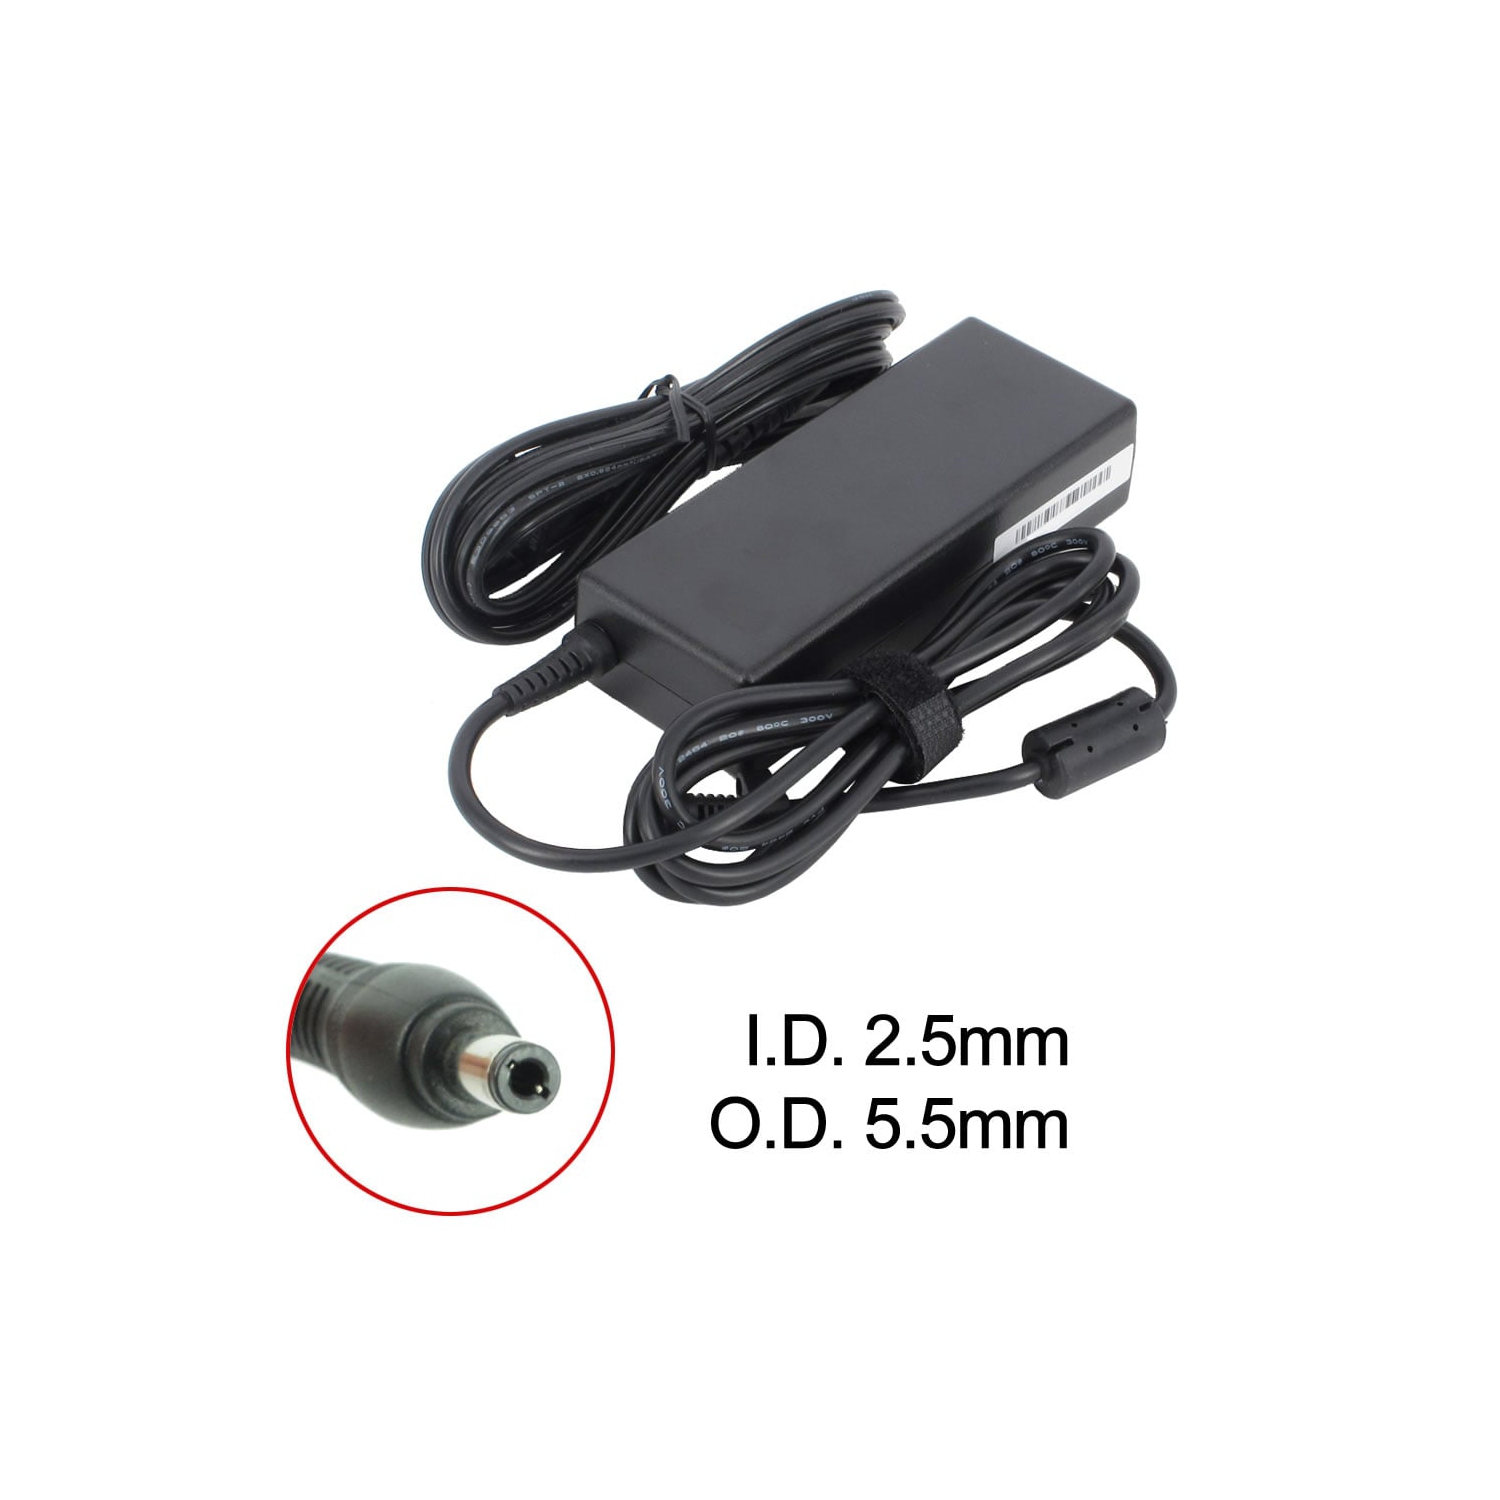 BATTDEPOT New Laptop AC Adapter for NEC LC500/5D 103942 808-875692-010A 9T458 ADP-65 HB BBEF PA-1900-36 SA80-3115